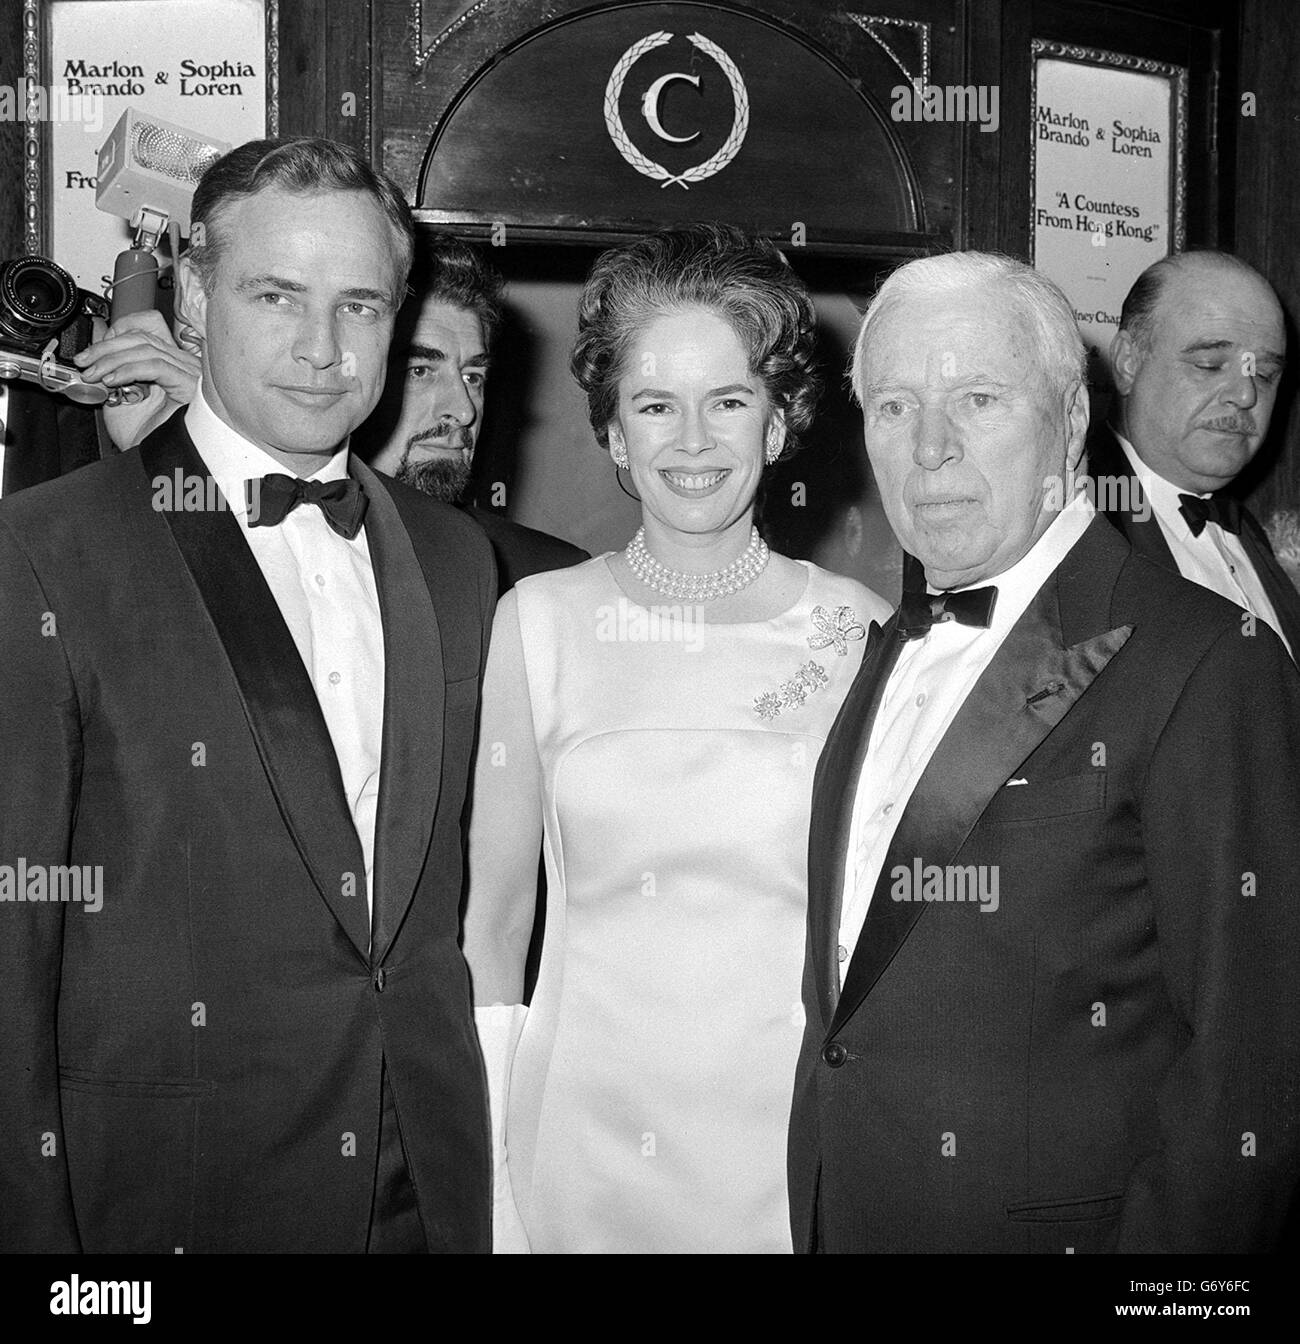 Charles Chaplin adn his wife Oona with Marlon Brando at the Carlton Theatre, Haymarket, London for the charity world premiere of Chaplin's first film for ten years 'A Countess from Hong Kong'. Brando stars in the film with Sophia Loren. Stock Photo